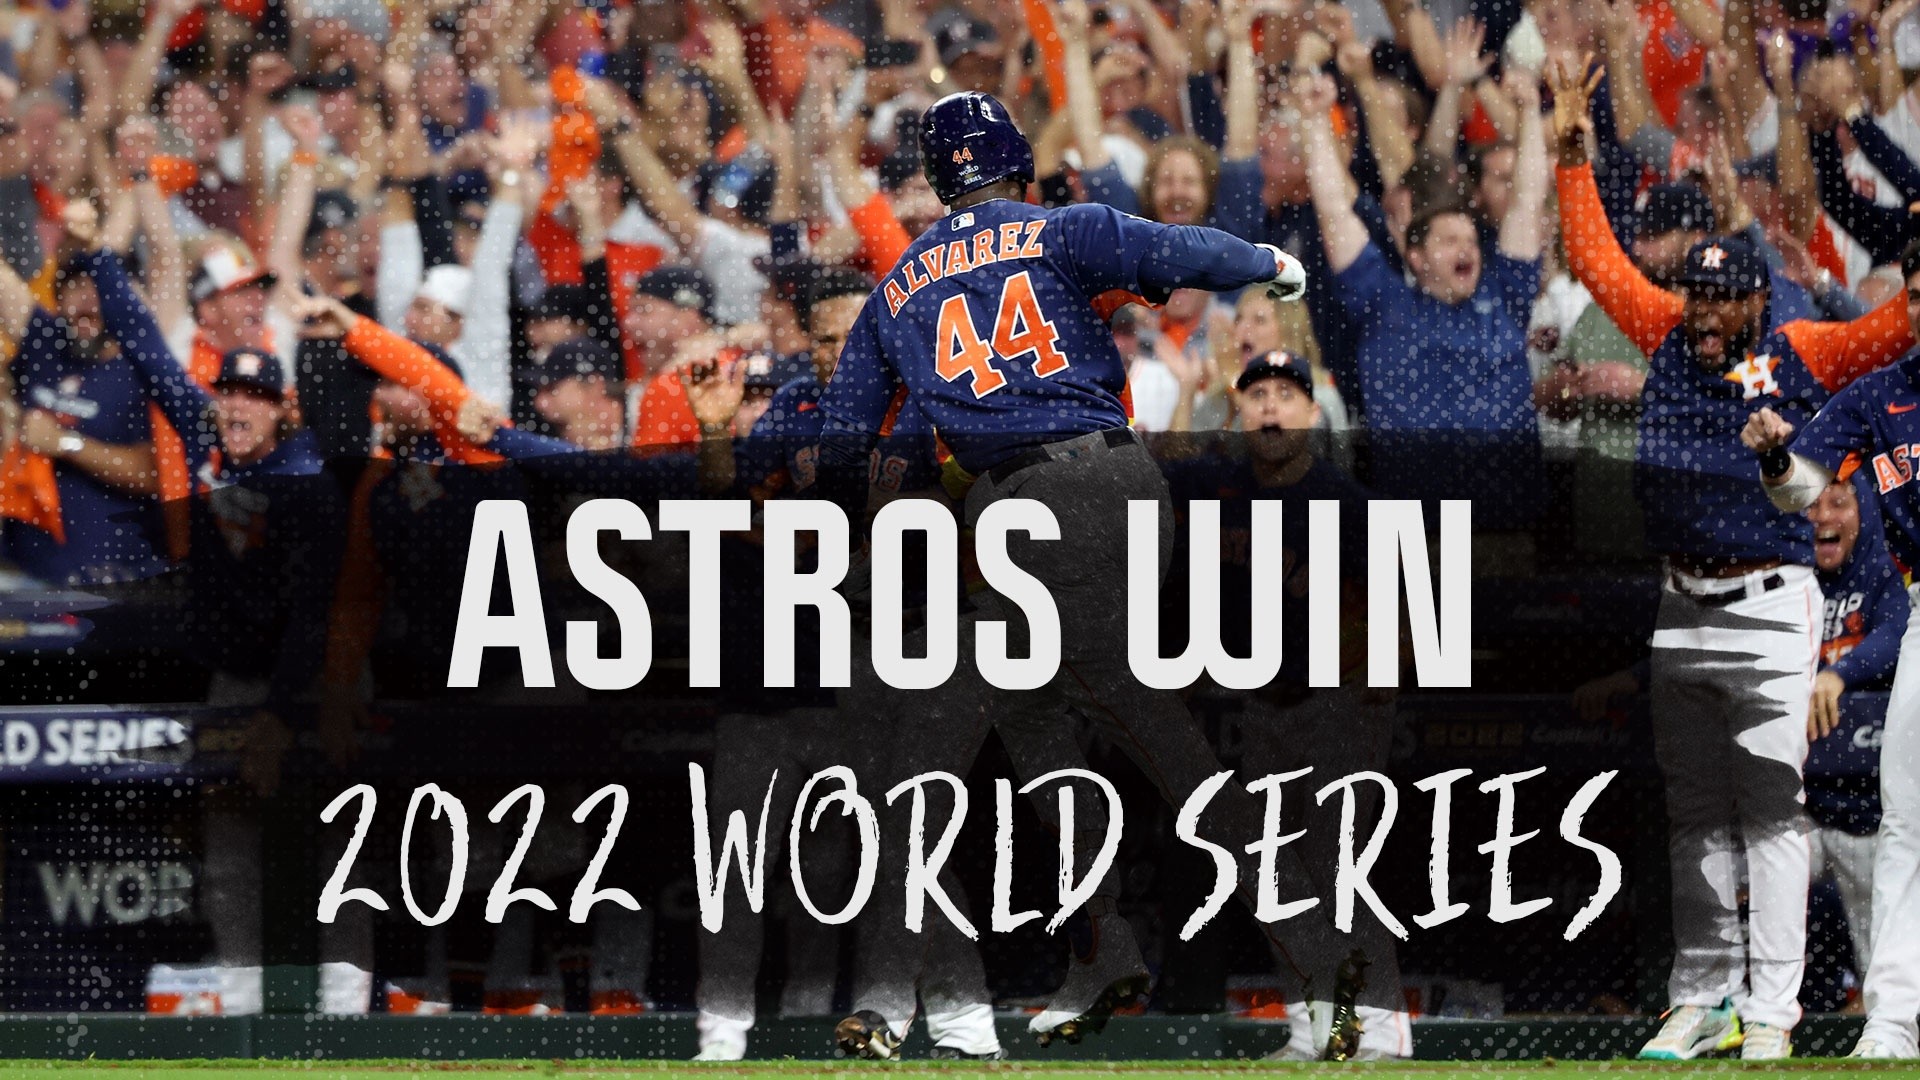 Phillies-Astros World Series: Another billboard calling out